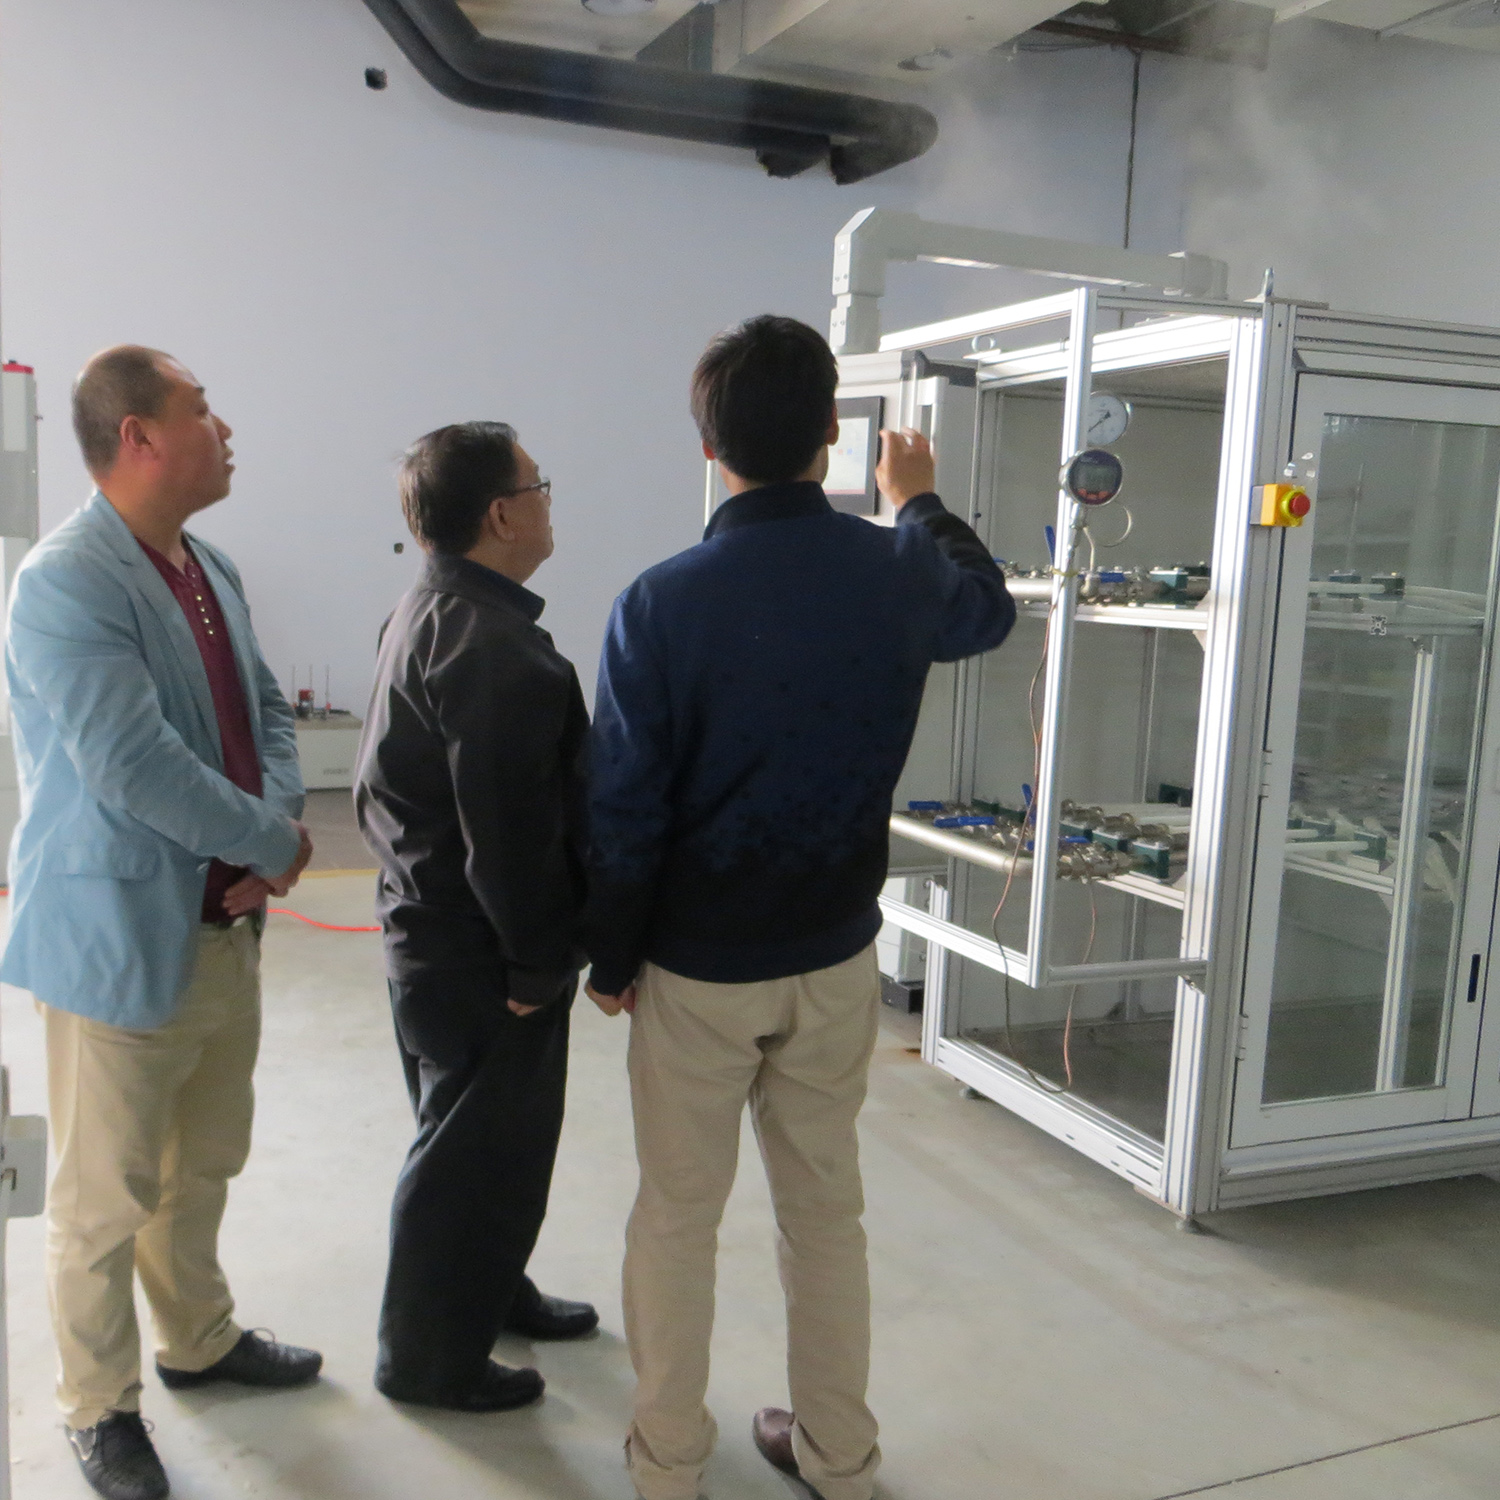 Welcome the visitor from TUV SUD to inspect AT430 Pipe Thermal Cycling Tester